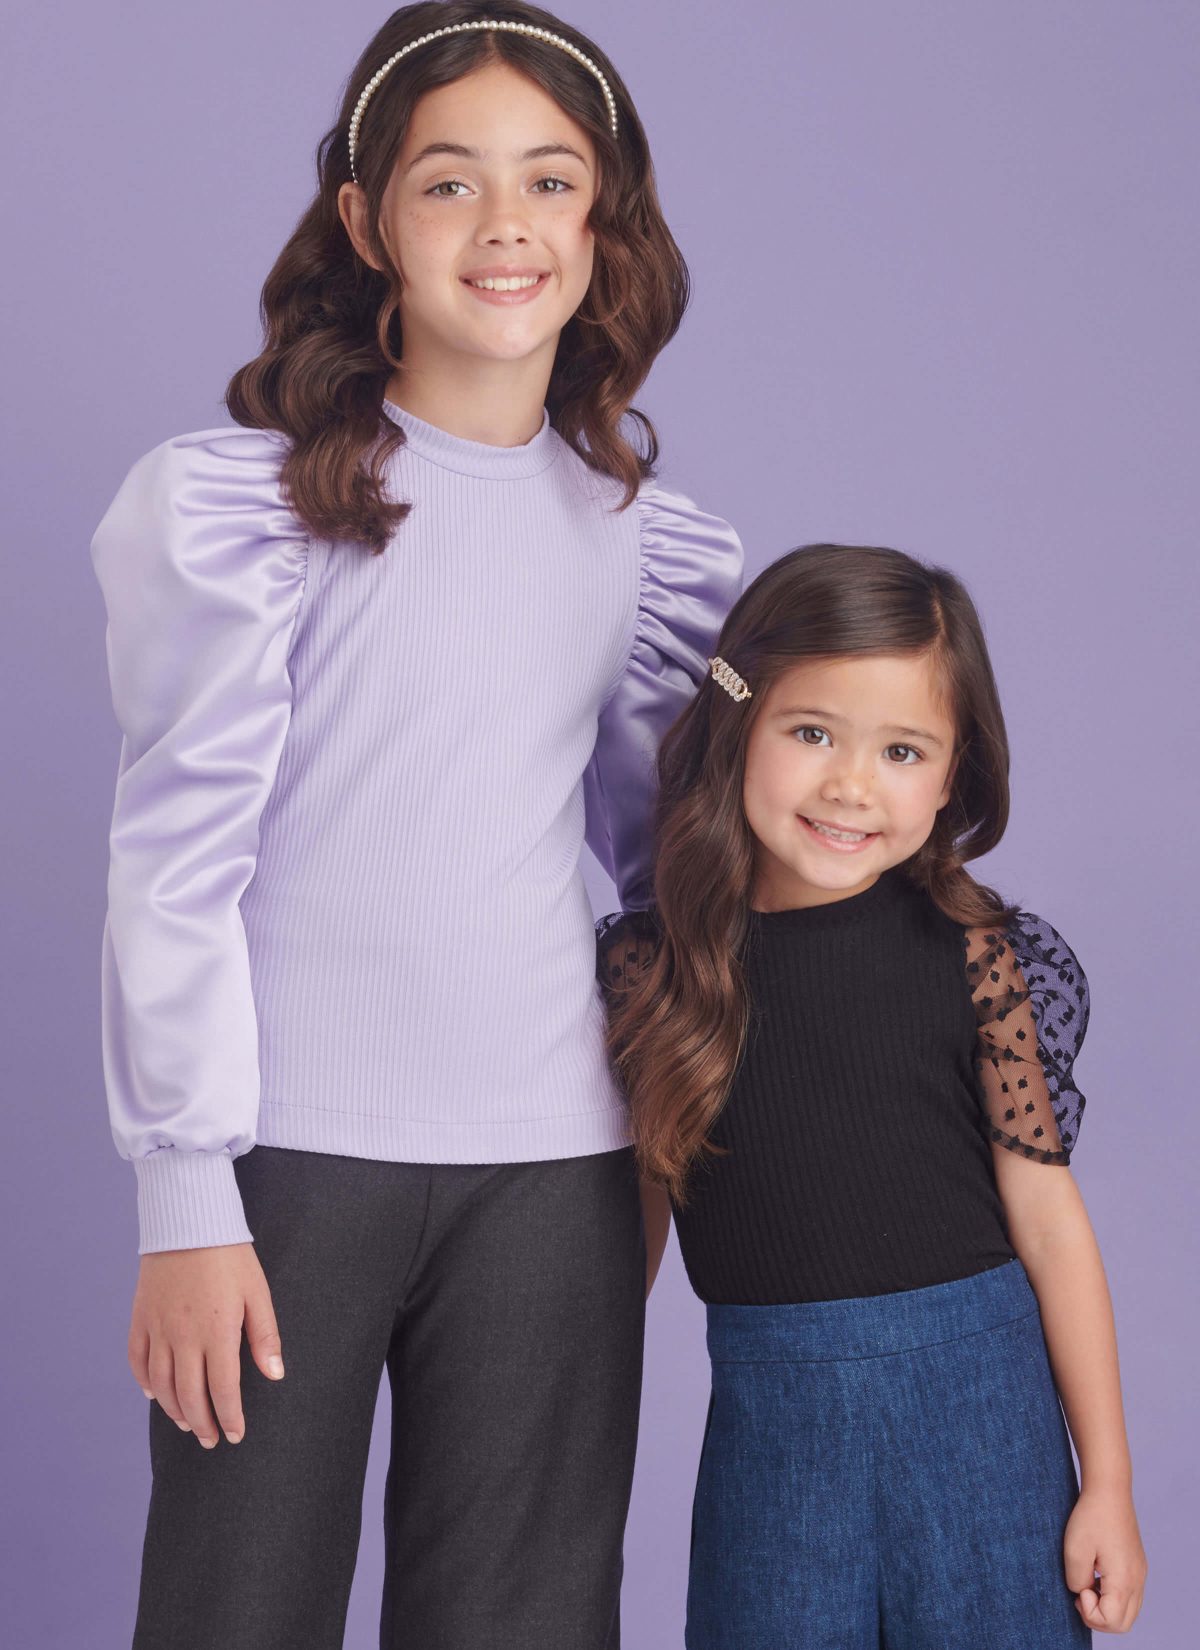 Simplicity Sewing Pattern S9863 Children's and Girls' Top and Trousers